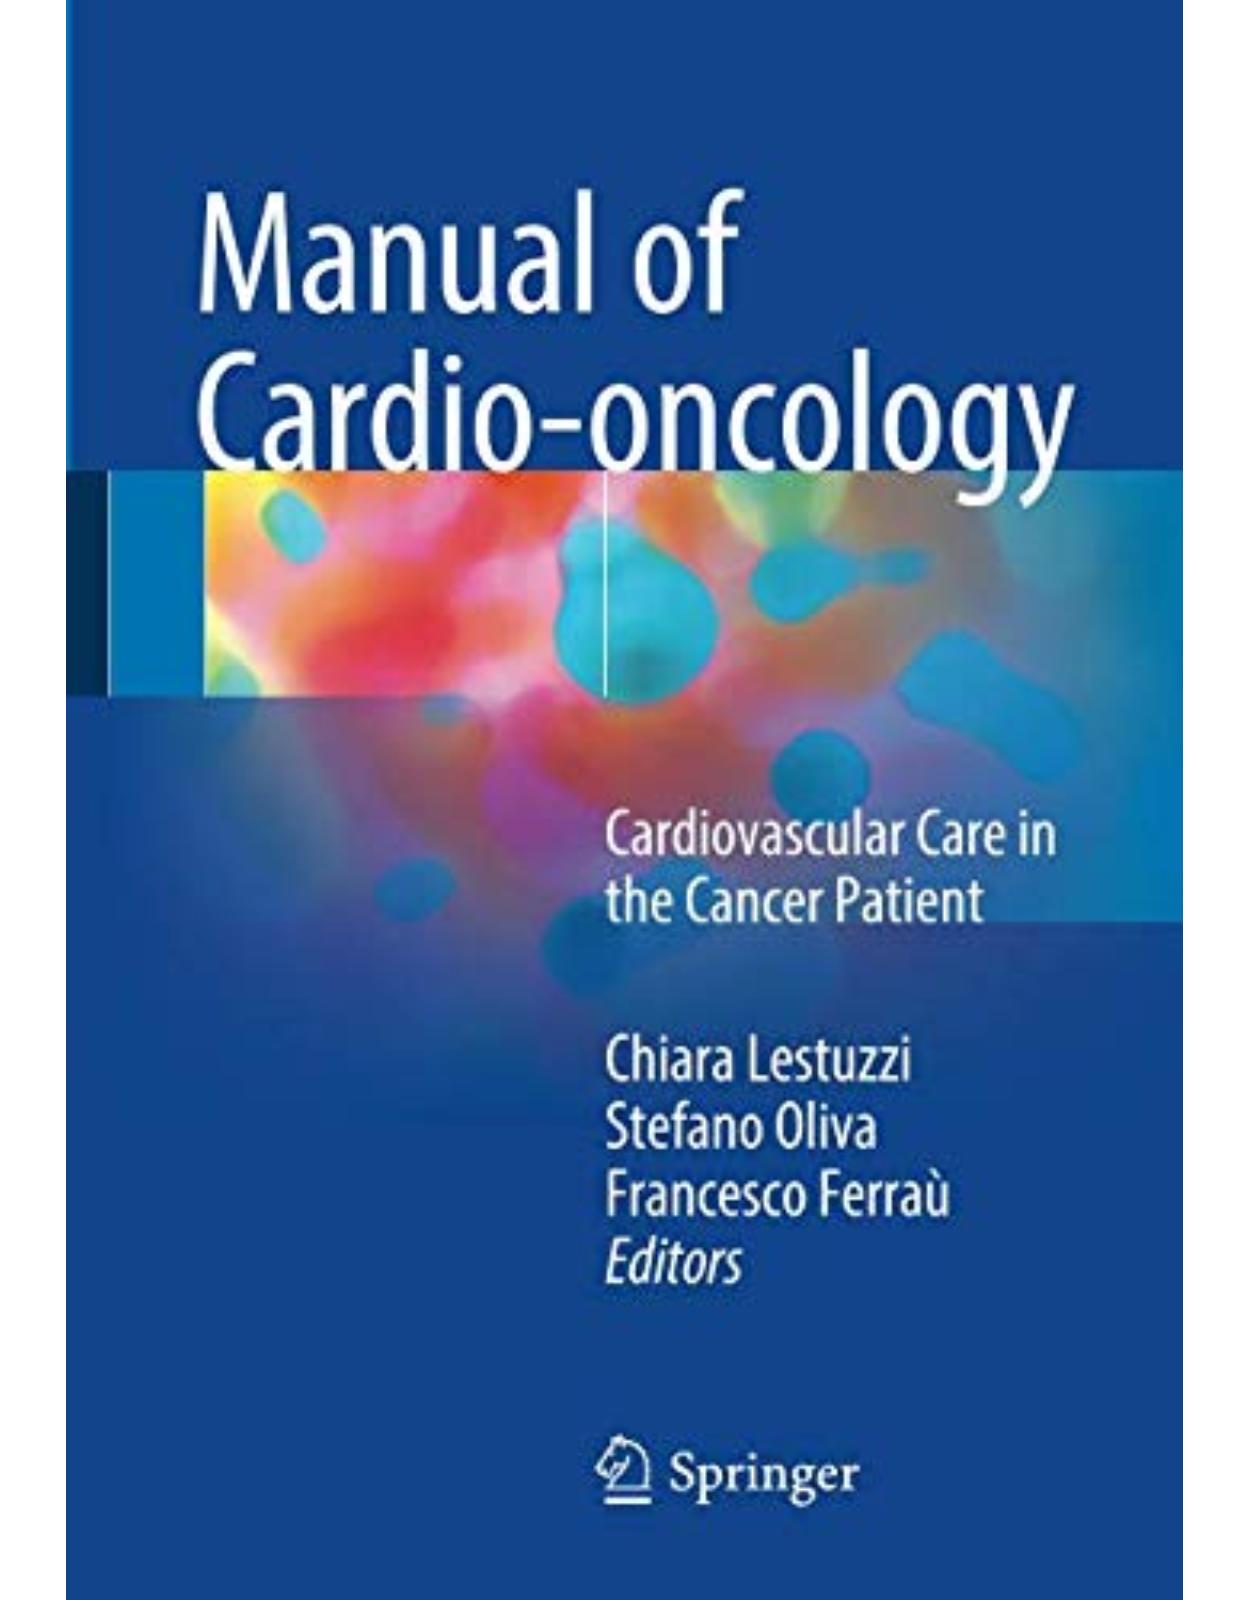 Manual of Cardio-oncology: Cardiovascular Care in the Cancer Patient